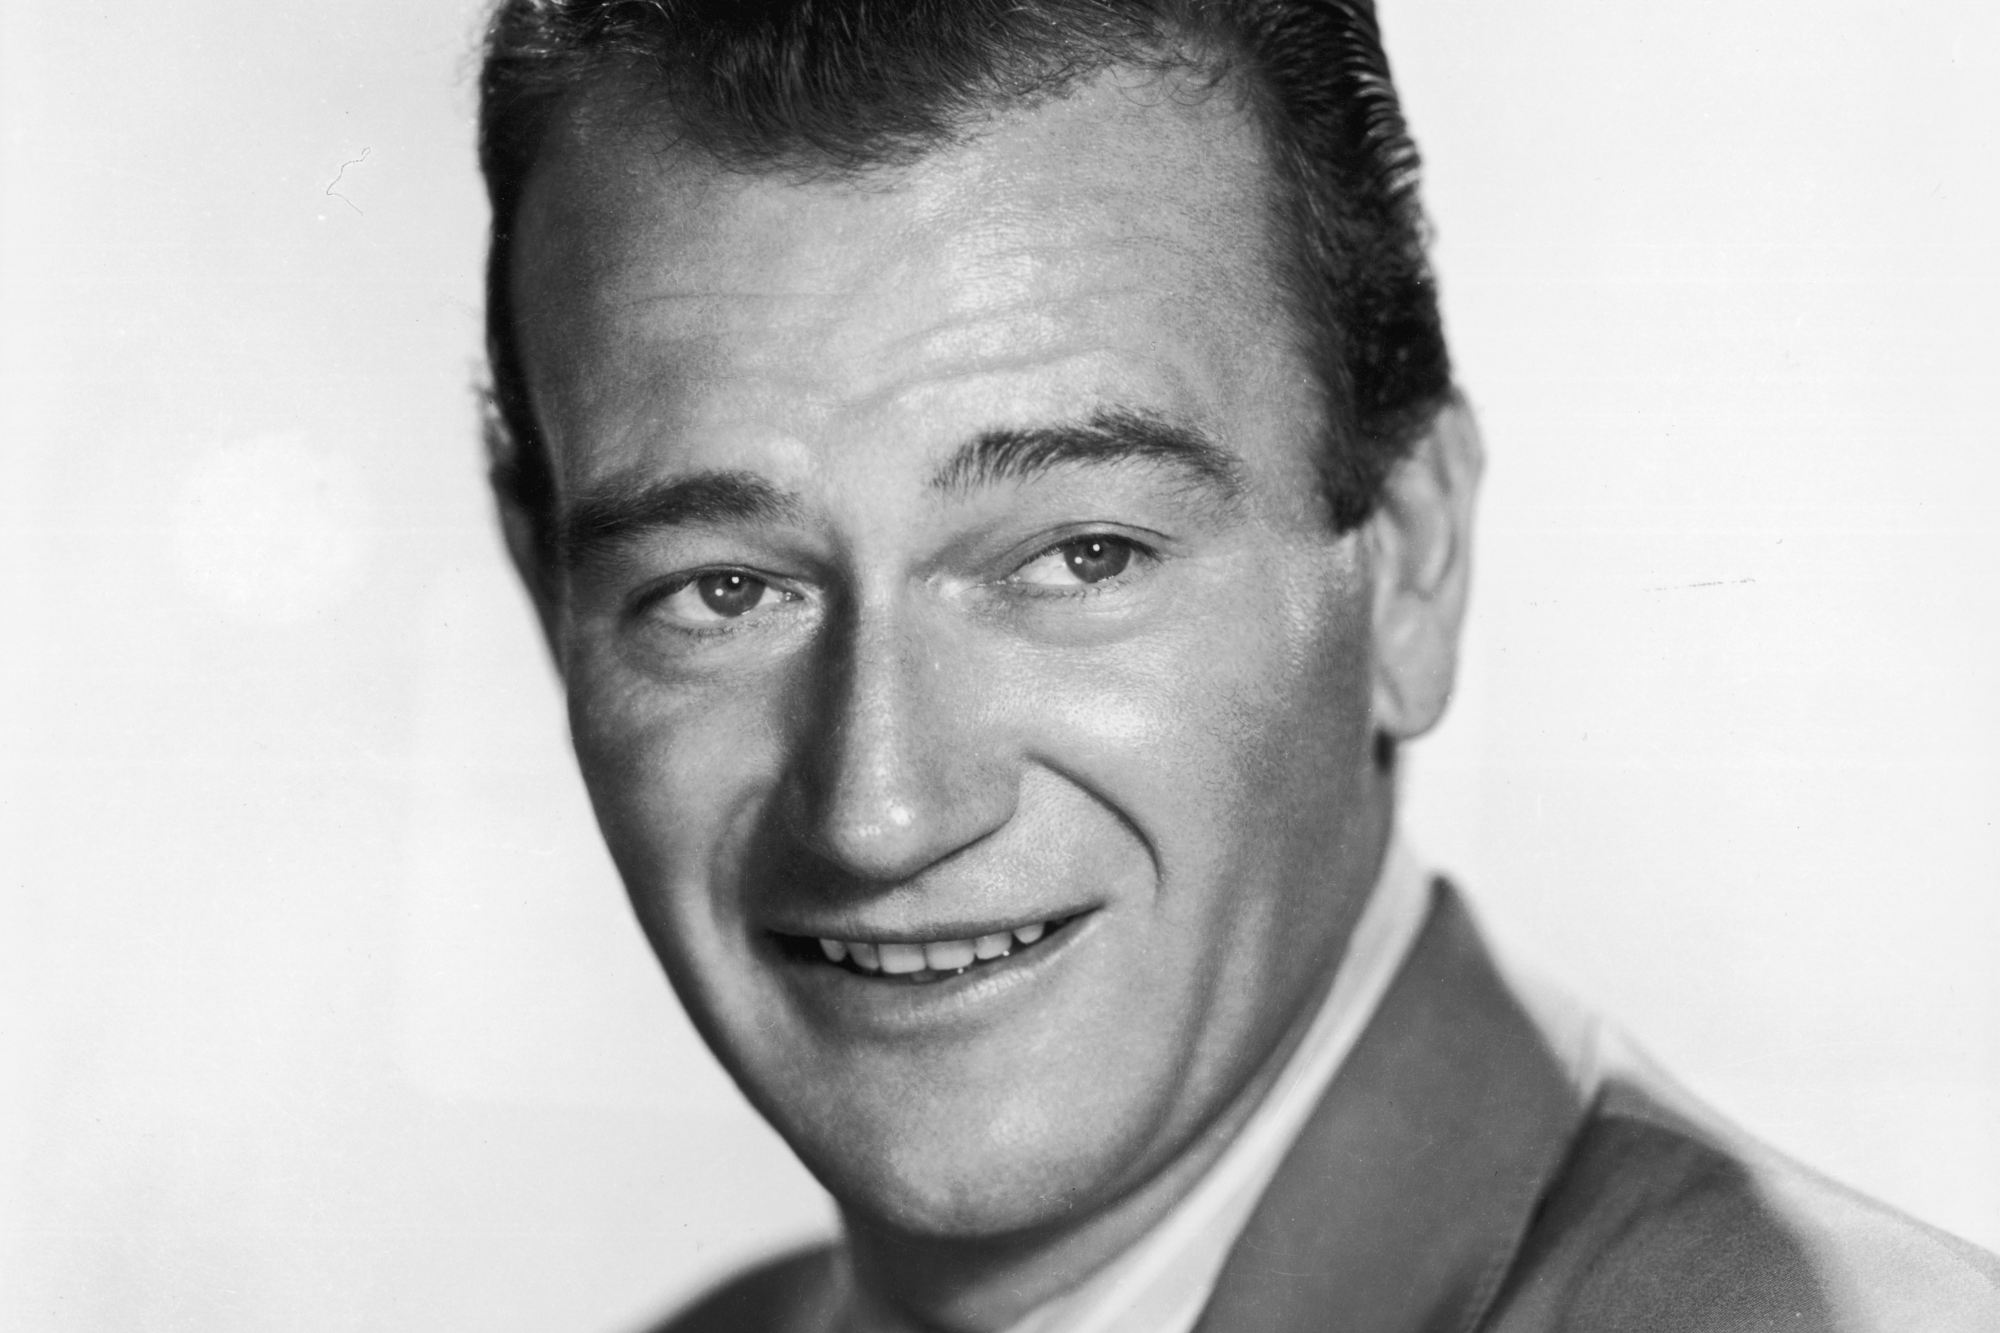 John Wayne, whose yearbook was on 'Pawn Stars.' He's smiling in a black-and-white portrait image, looking to the side.